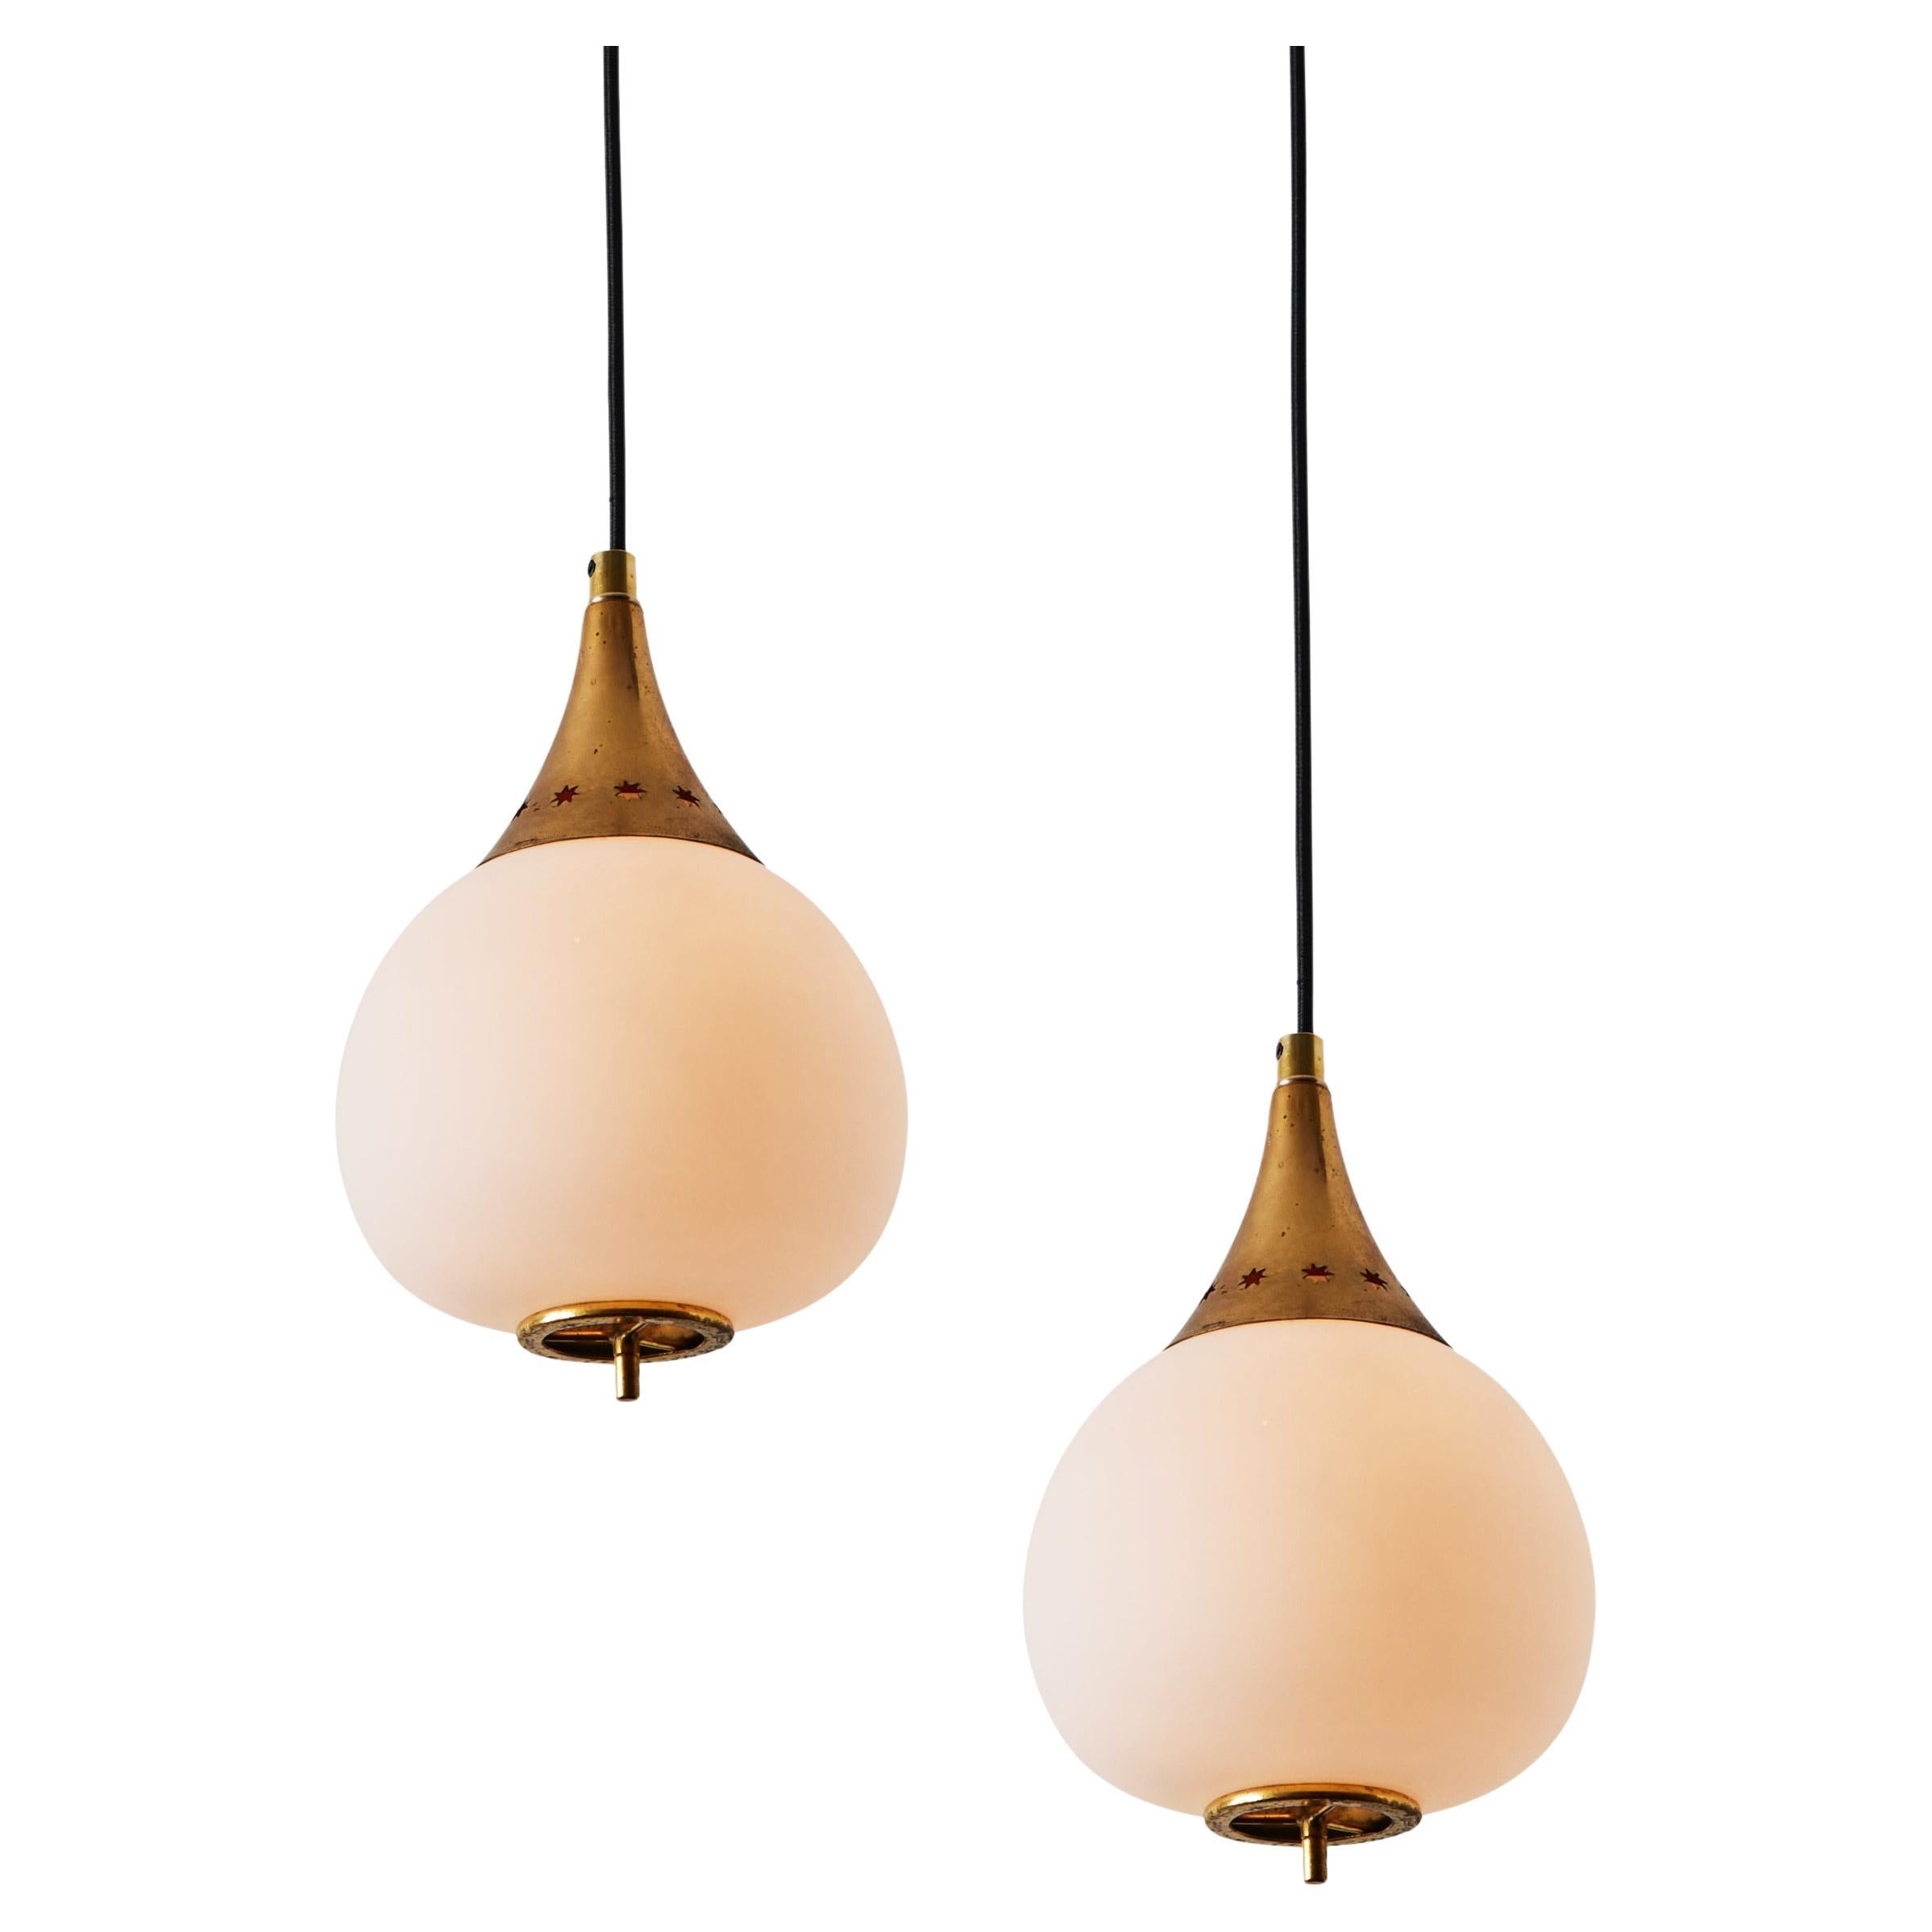 1950s Bruno Gatta Brass and Opaline Glass Pendant for Stilnovo. A quintessentially 1950s Italian design executed in matte finish opaline glass with attractively patinated sculptural brass hardware. A highly functional light sculpture of incomparable